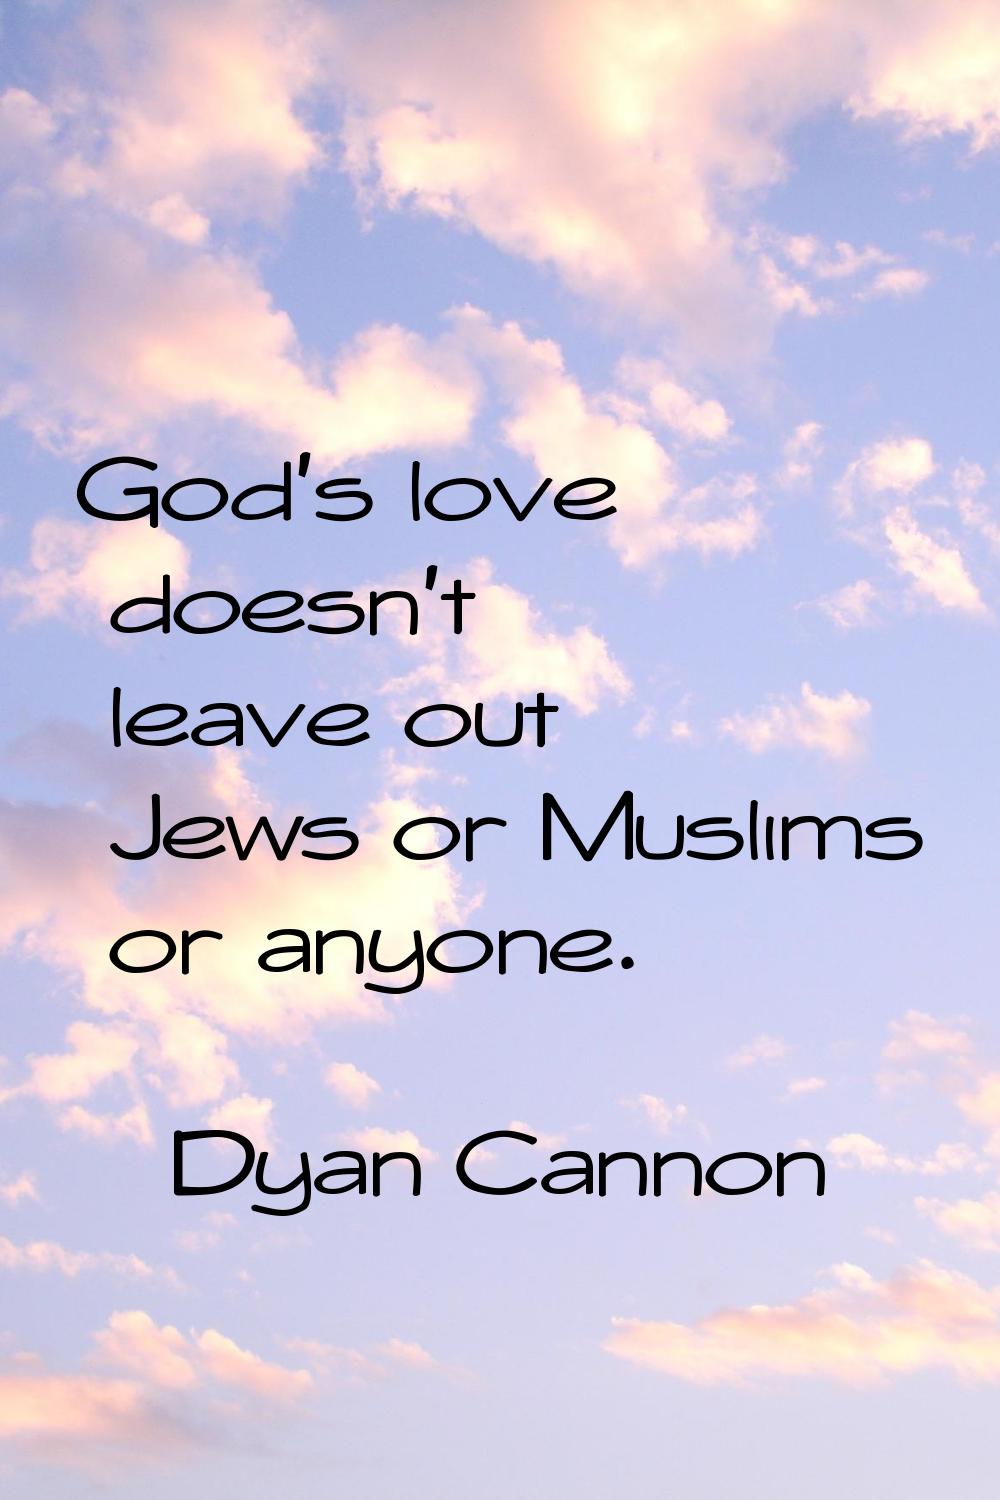 God's love doesn't leave out Jews or Muslims or anyone.